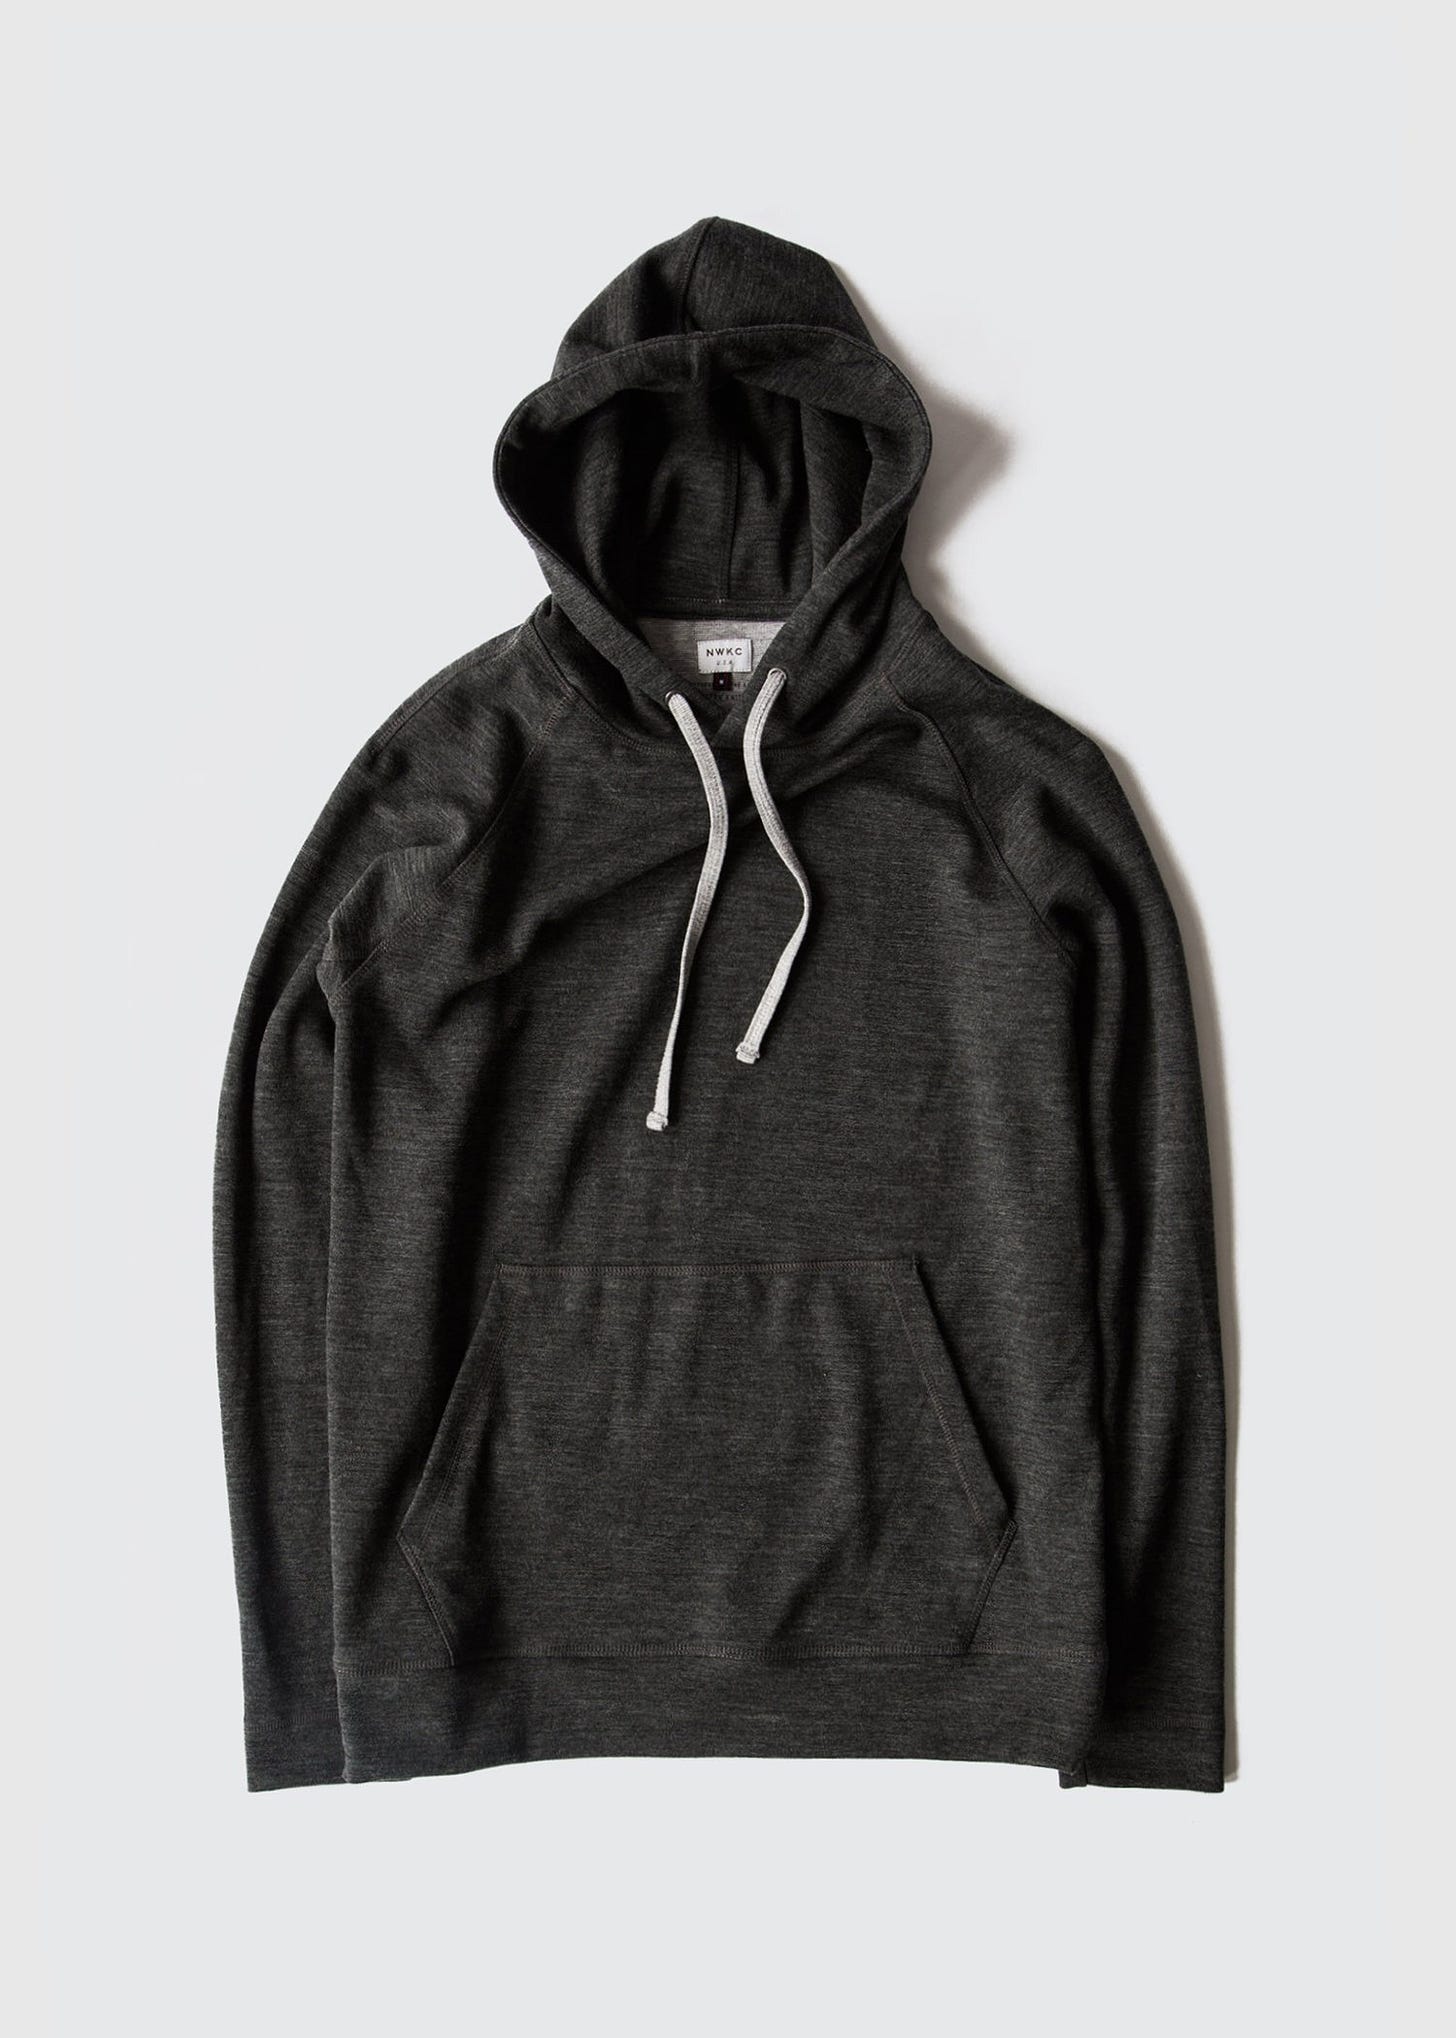 Hooded_Pullover_Charcoal1_1728x.jpg